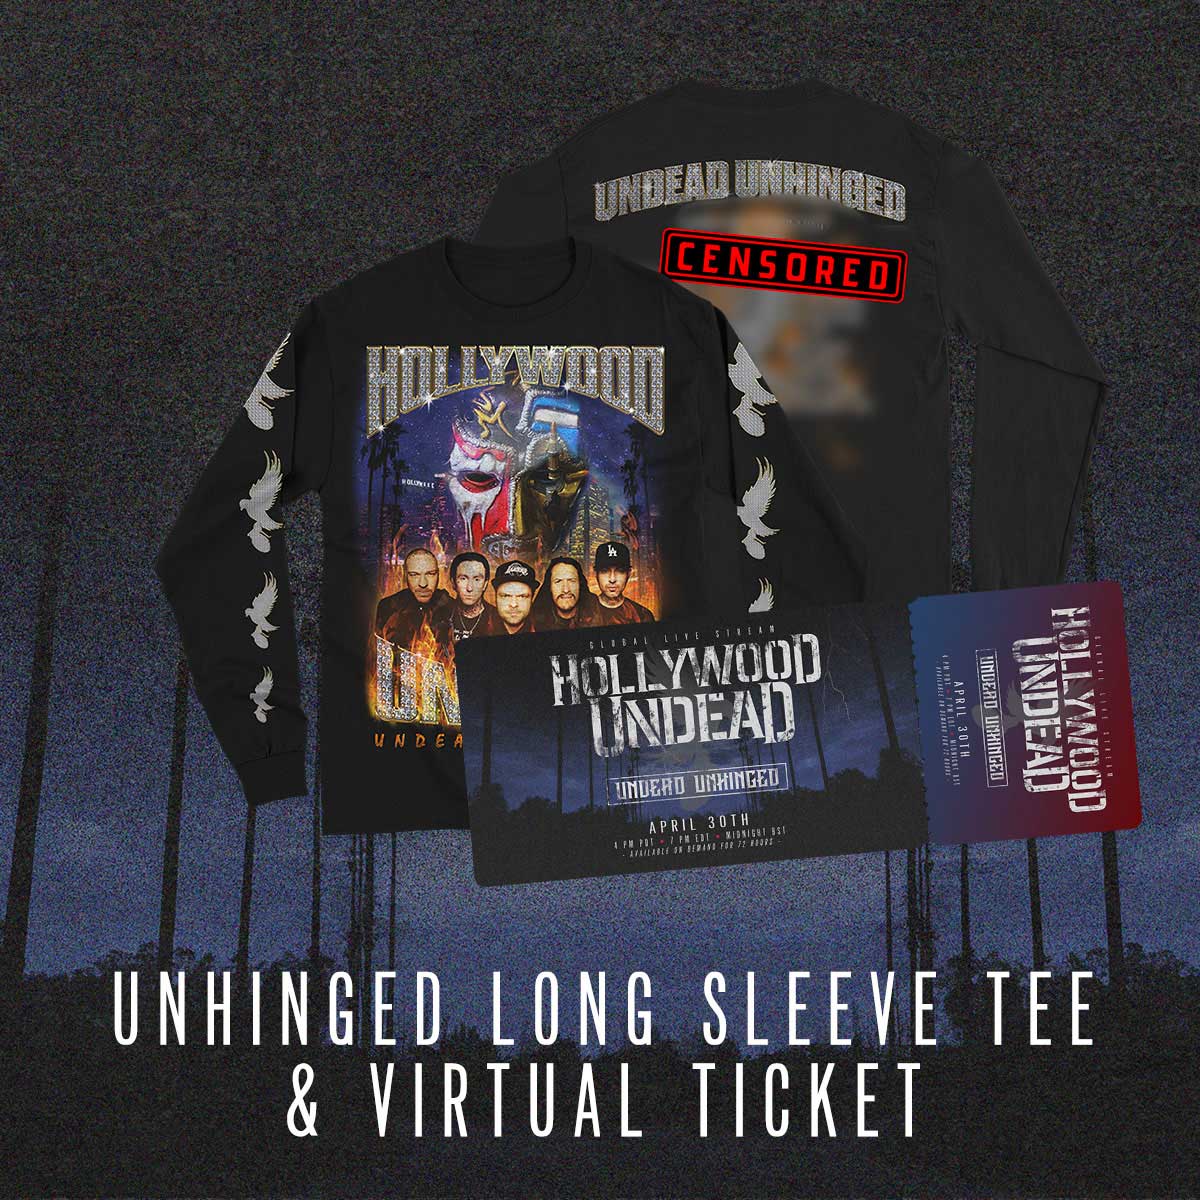 Image of Undead Unhinged Ticket + Bling Long Sleeve Tee